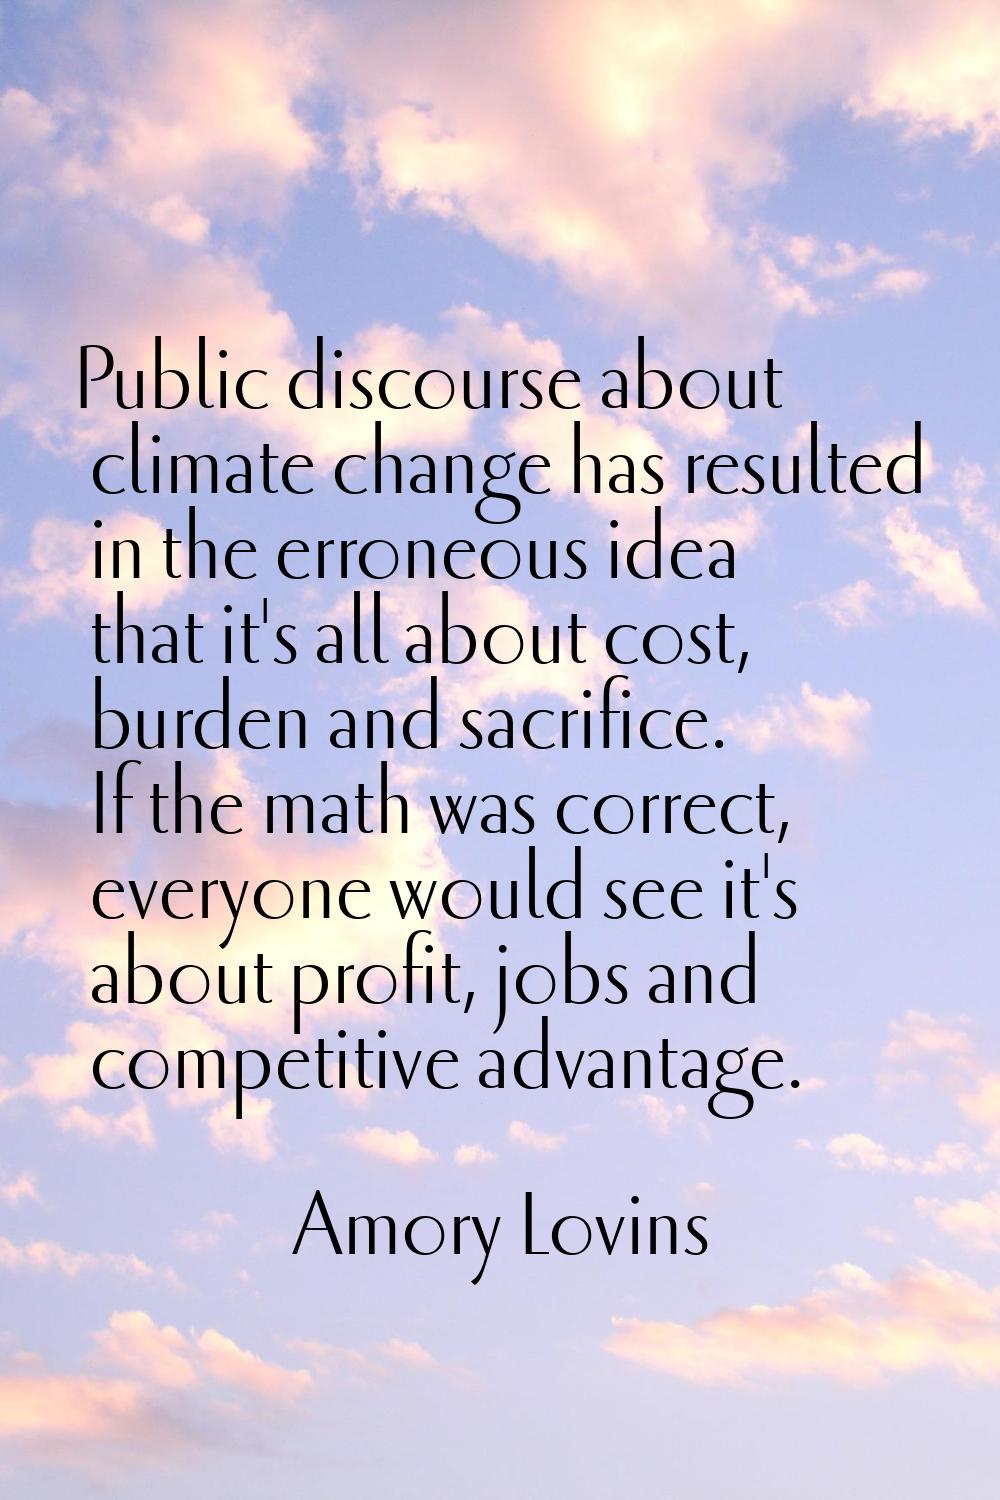 Public discourse about climate change has resulted in the erroneous idea that it's all about cost, 